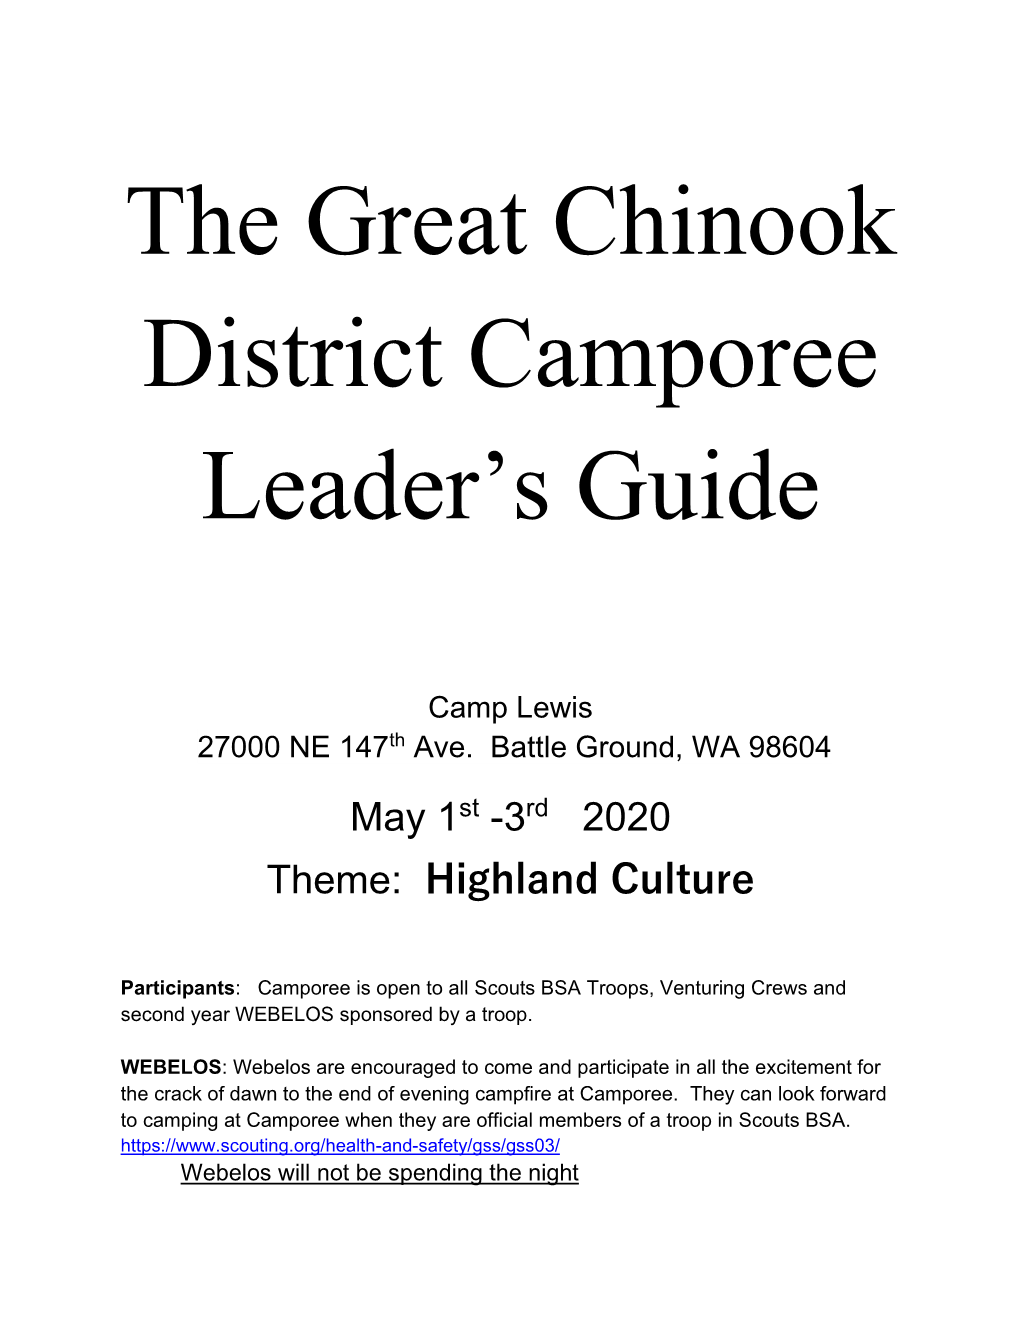 The Great Chinook District Camporee Leader's Guide